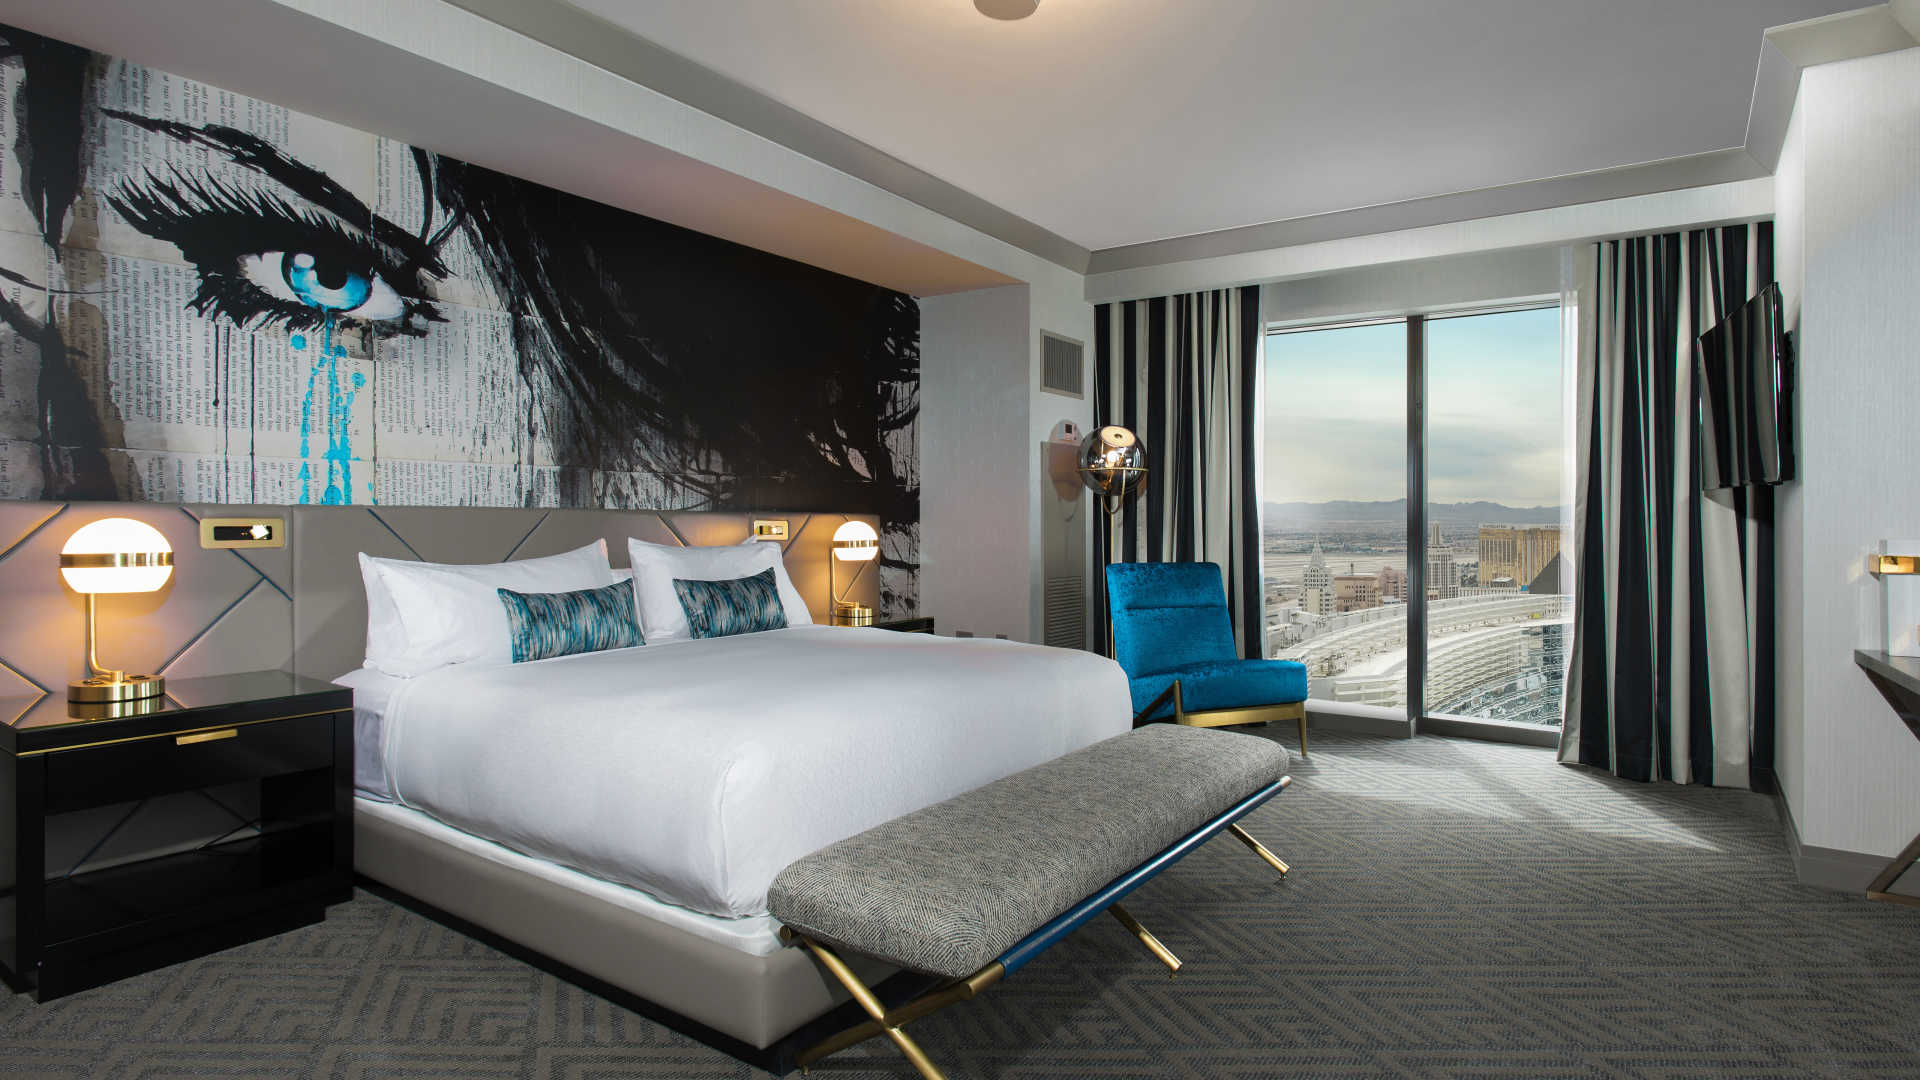 Las Vegas Hotel Suites The Most Expensive Hotel Rooms In Las Vegas Are Baller Showtainment